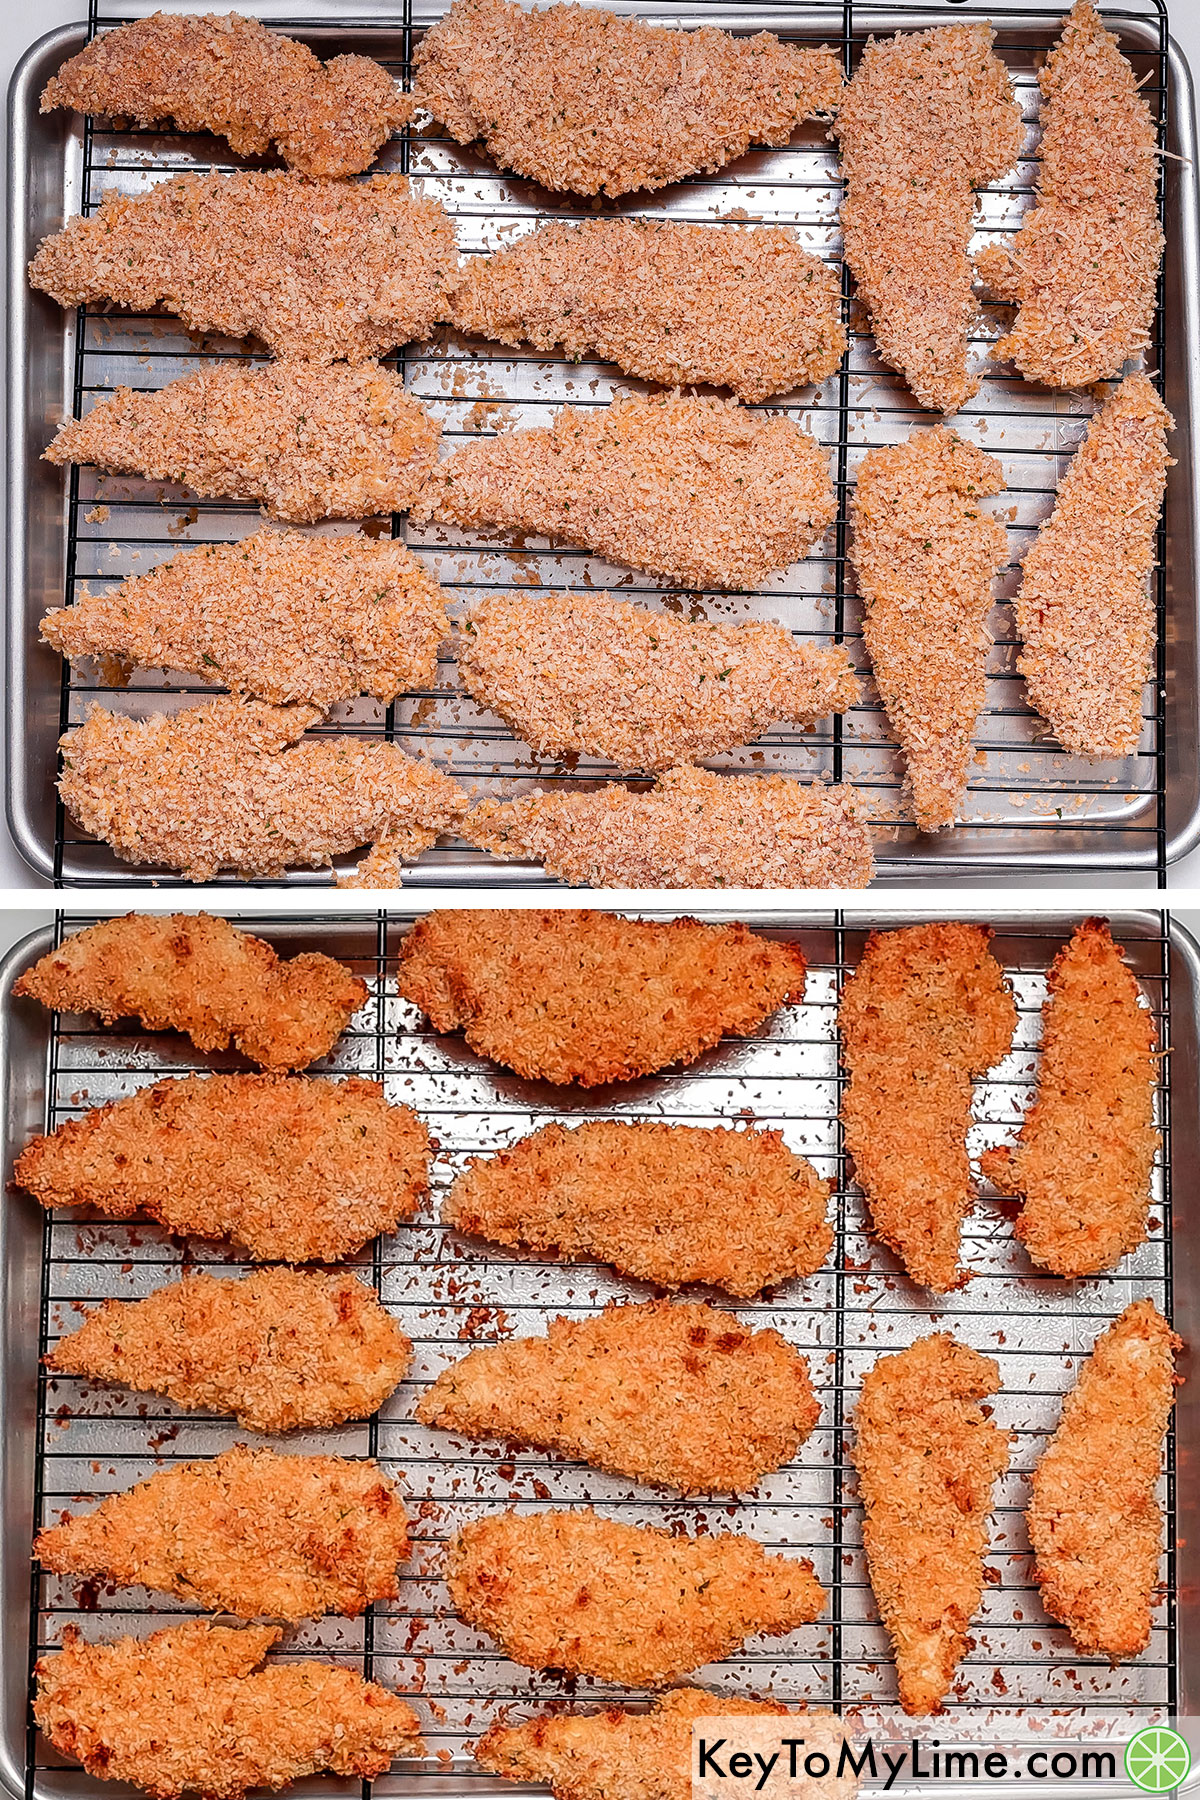 Placing the coated tenders on a wire rack and spraying each tender with cooking oil and then baking in an oven until golden brown.